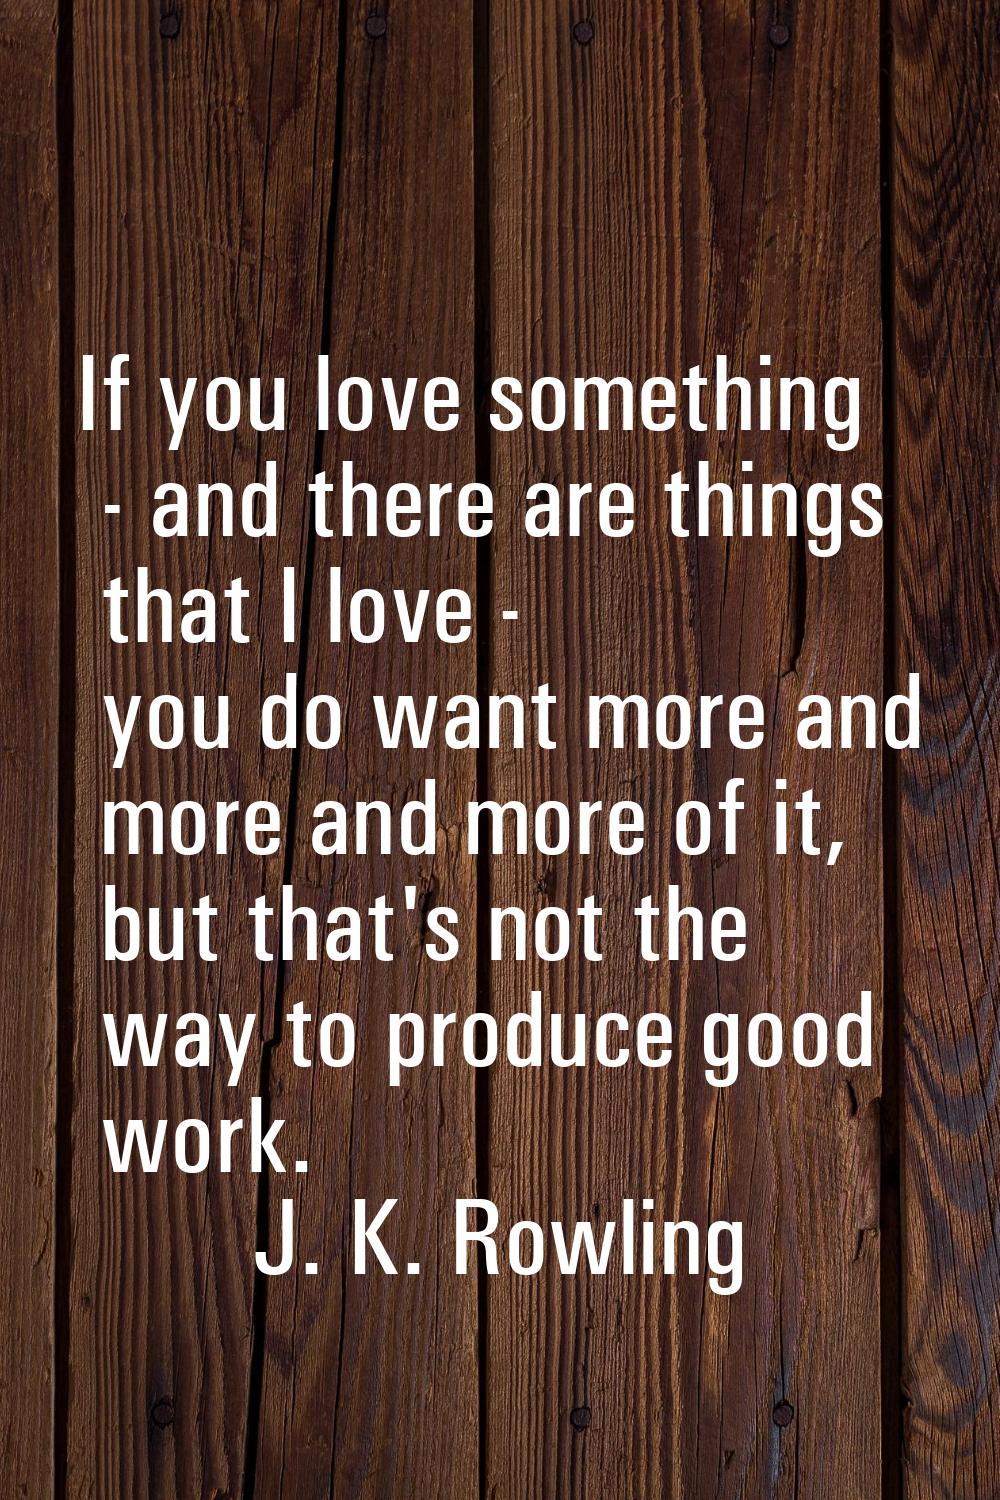 If you love something - and there are things that I love - you do want more and more and more of it